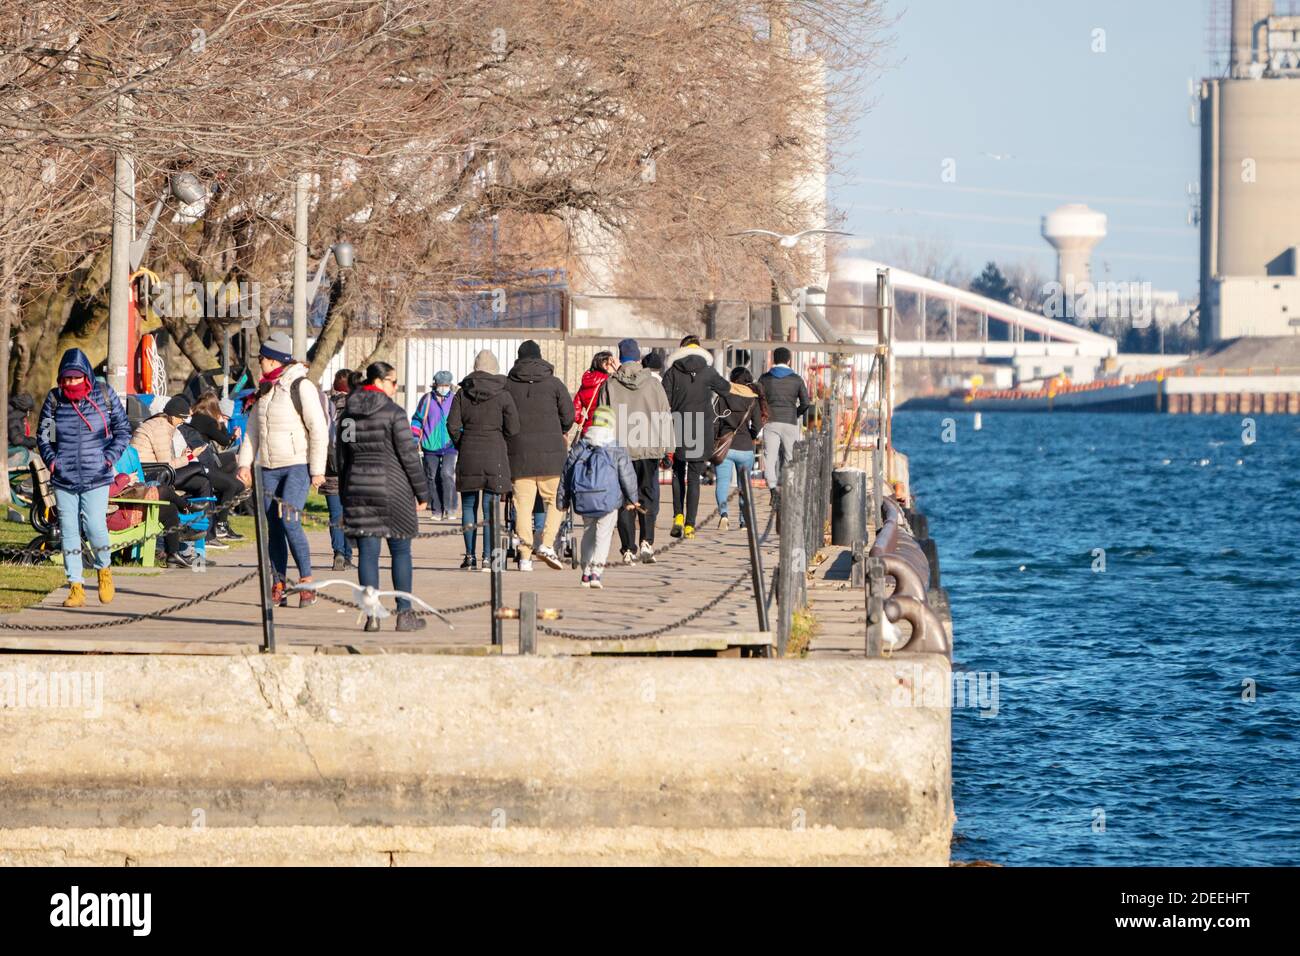 Crowds of people spend a sunny day mear Toronto Island Ferry Dock along waterfront path during the peak of Covid-19 pandemic on November 28, 2020 Stock Photo